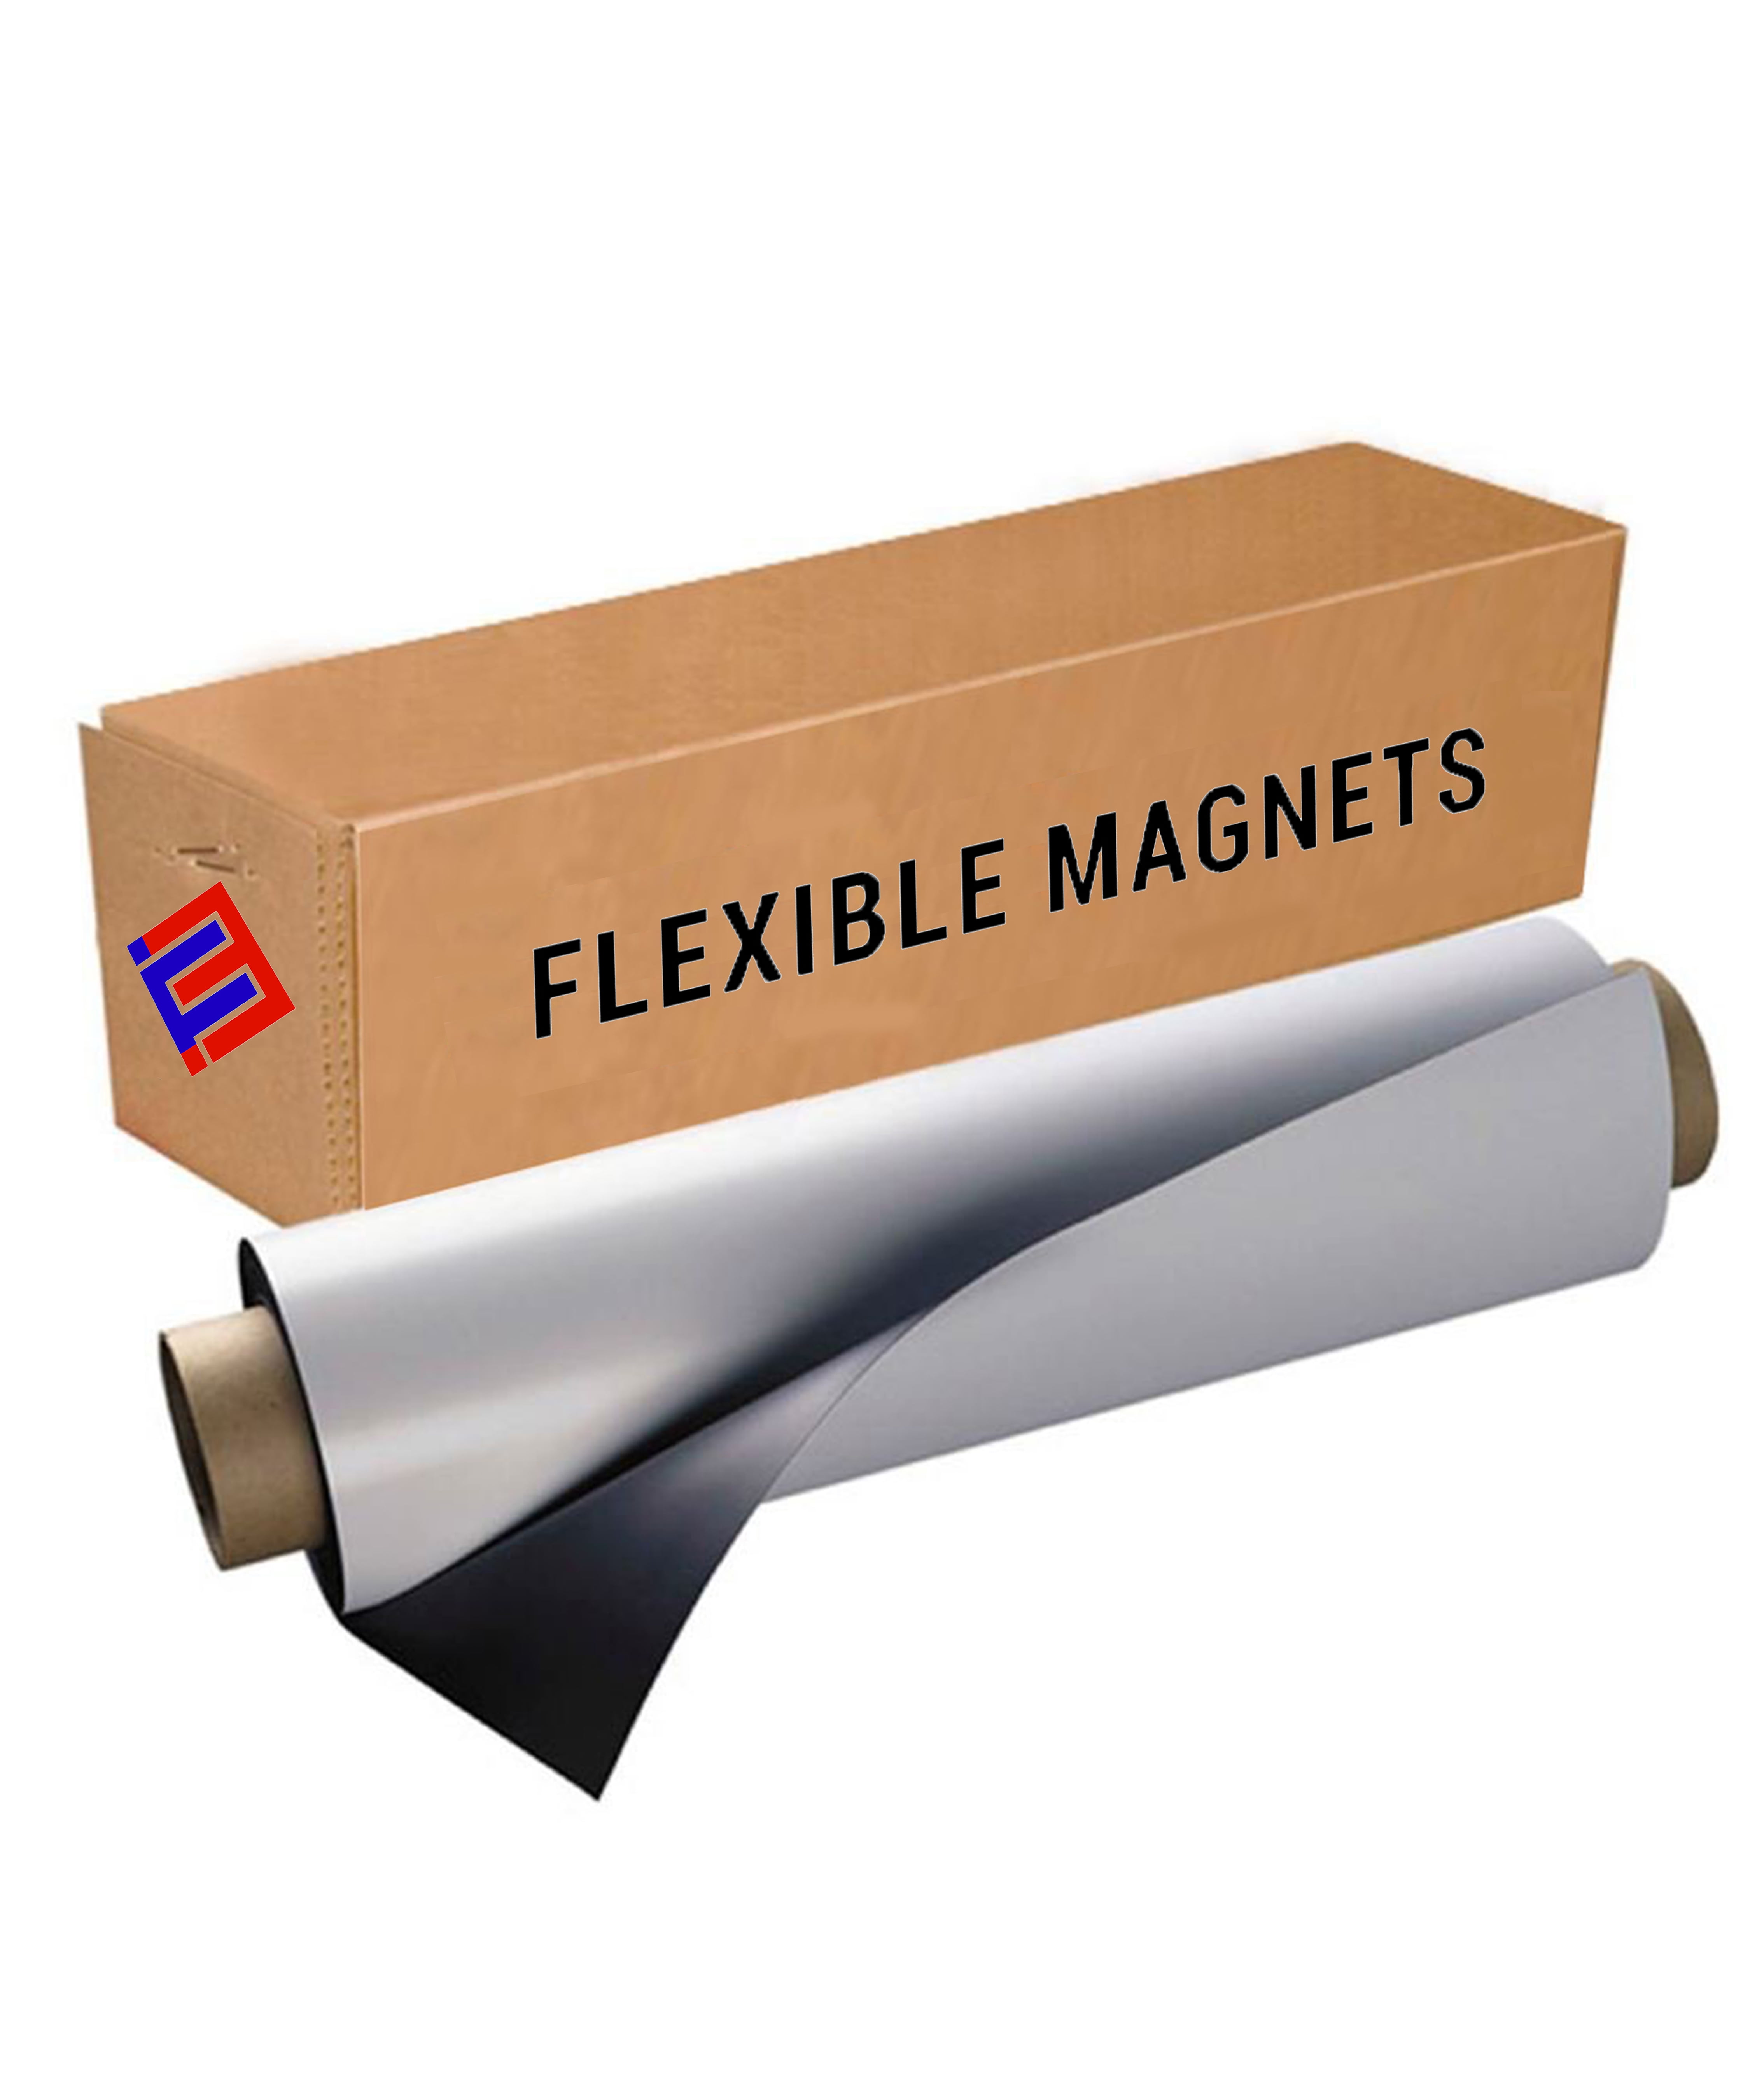 Self Adhesive Magnetic Sheets for Photos & Crafts by Flexible Magnets- 4''x 6'' 20 Millimeter - 2 Pack, Size: 4XL 6 20 mil, Red